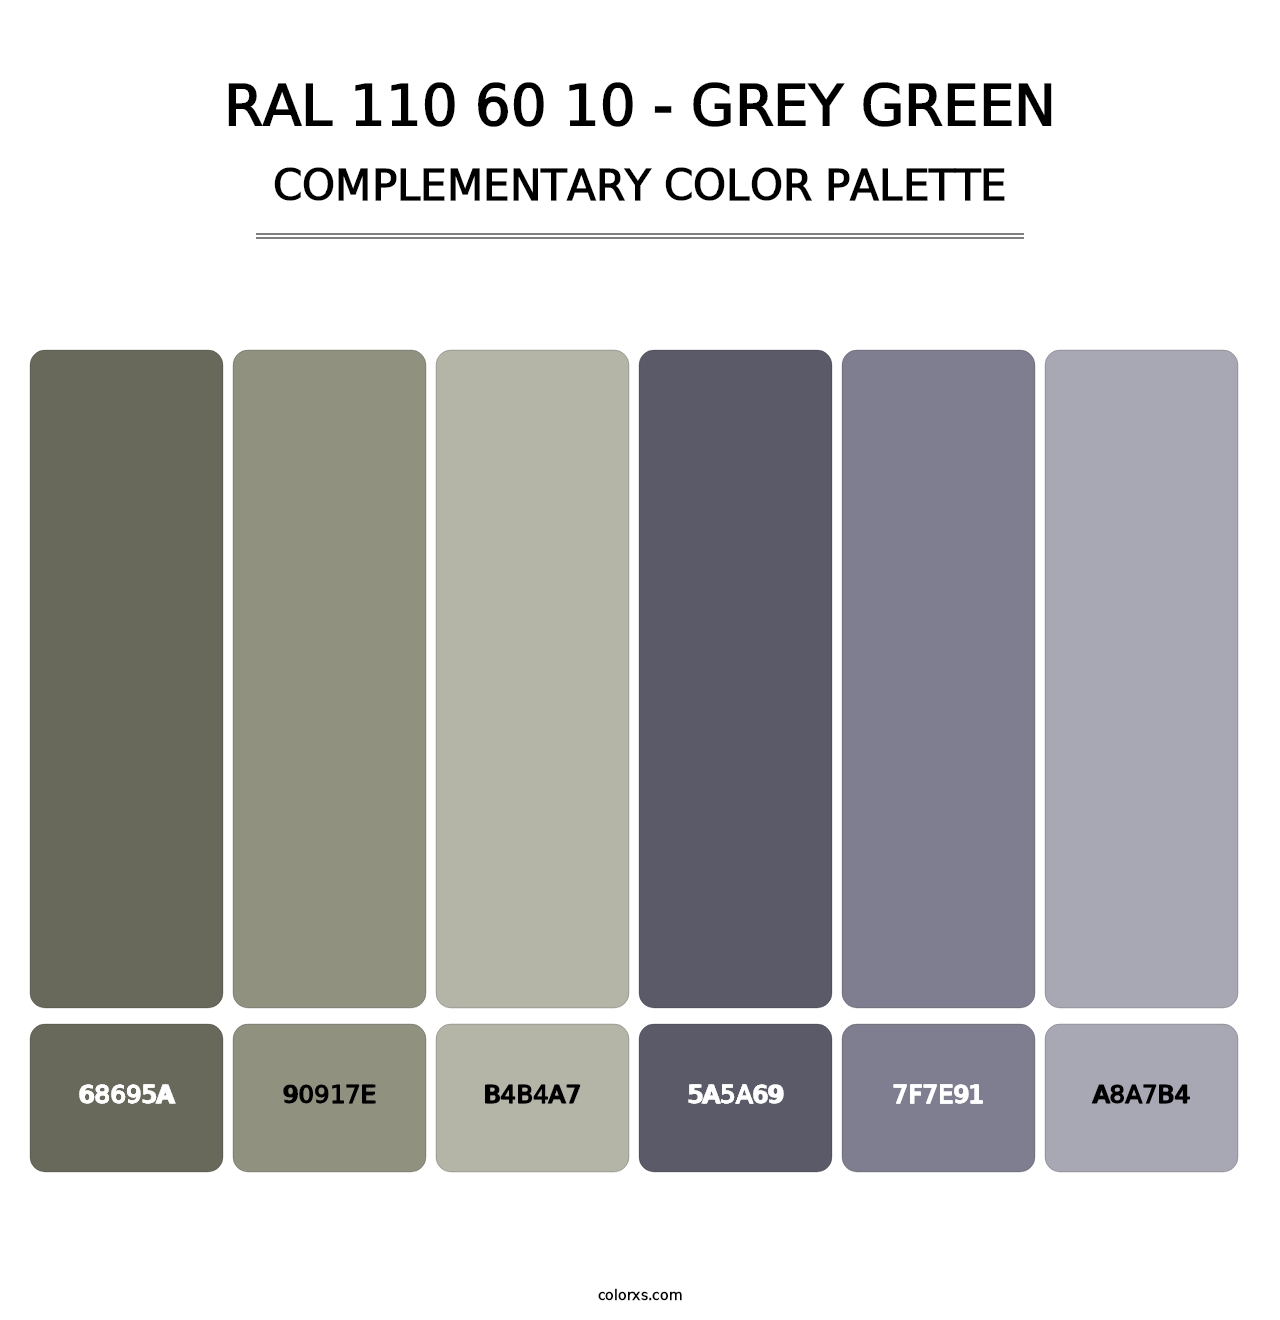 RAL 110 60 10 - Grey Green - Complementary Color Palette